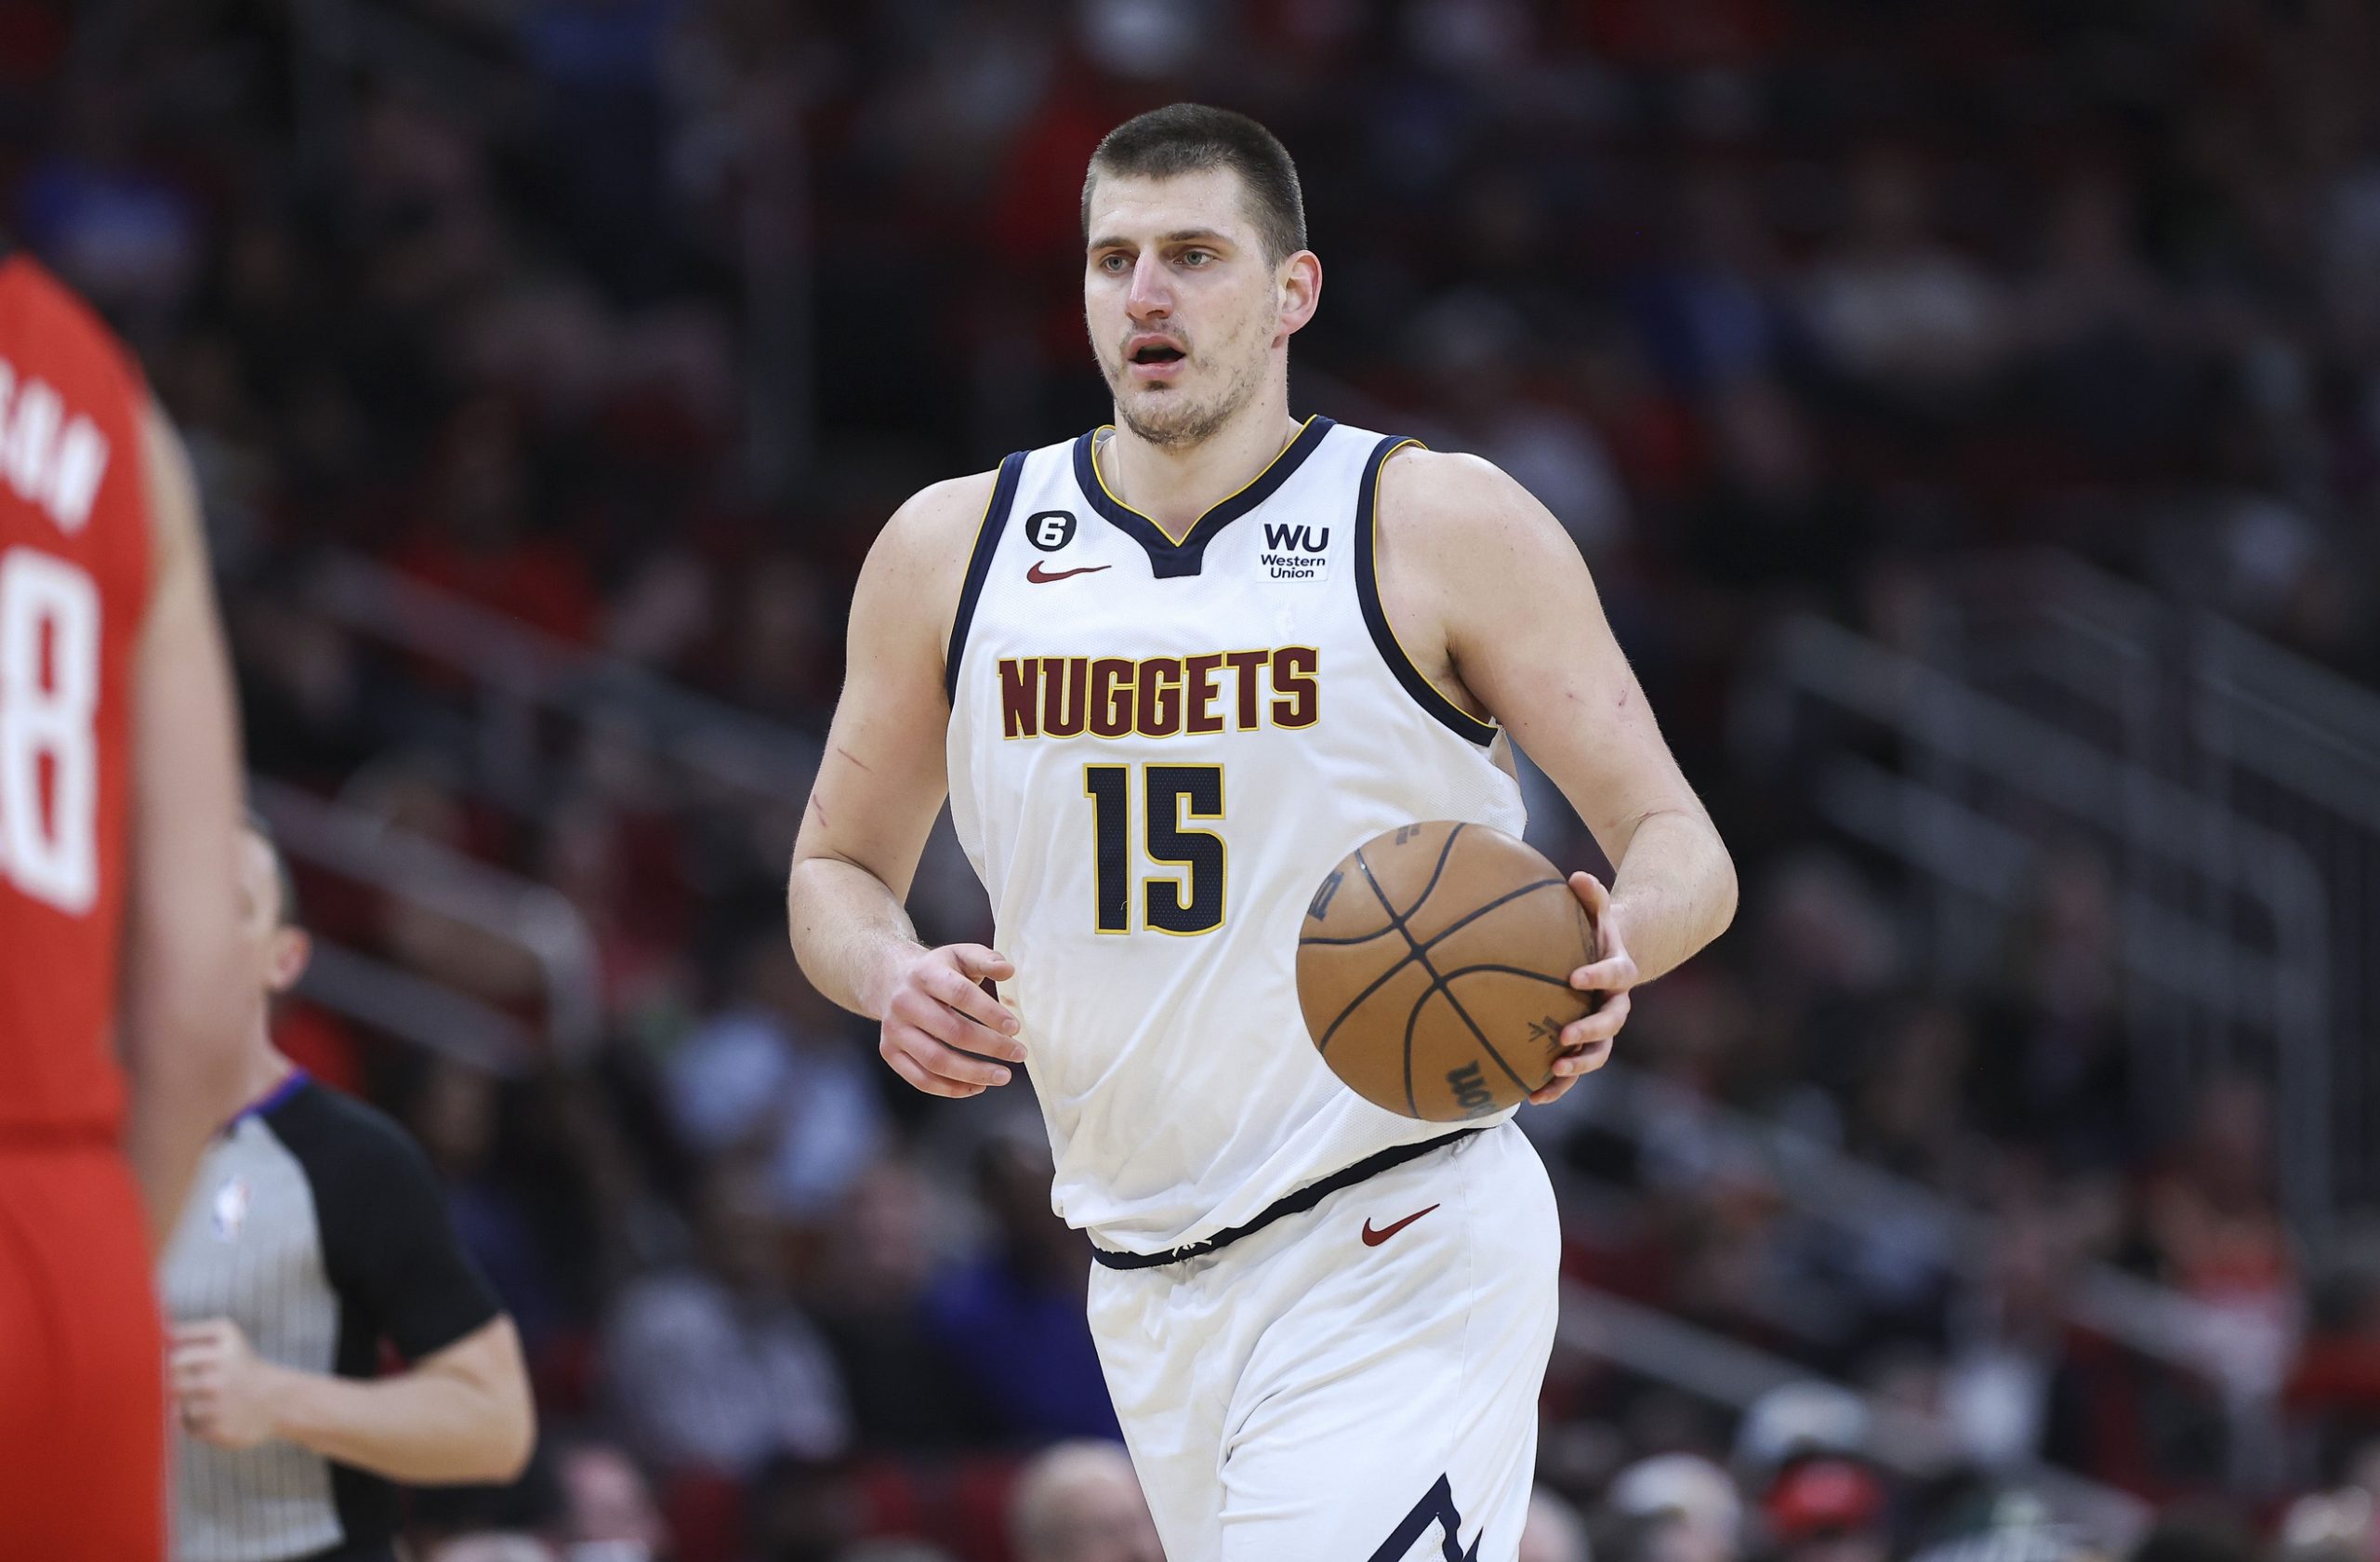 Feb 28, 2023; Houston, Texas, USA; Denver Nuggets center Nikola Jokic (15) brings the ball up the court during the third quarter against the Houston Rockets at Toyota Center. Mandatory Credit: Troy Taormina-USA TODAY Sports